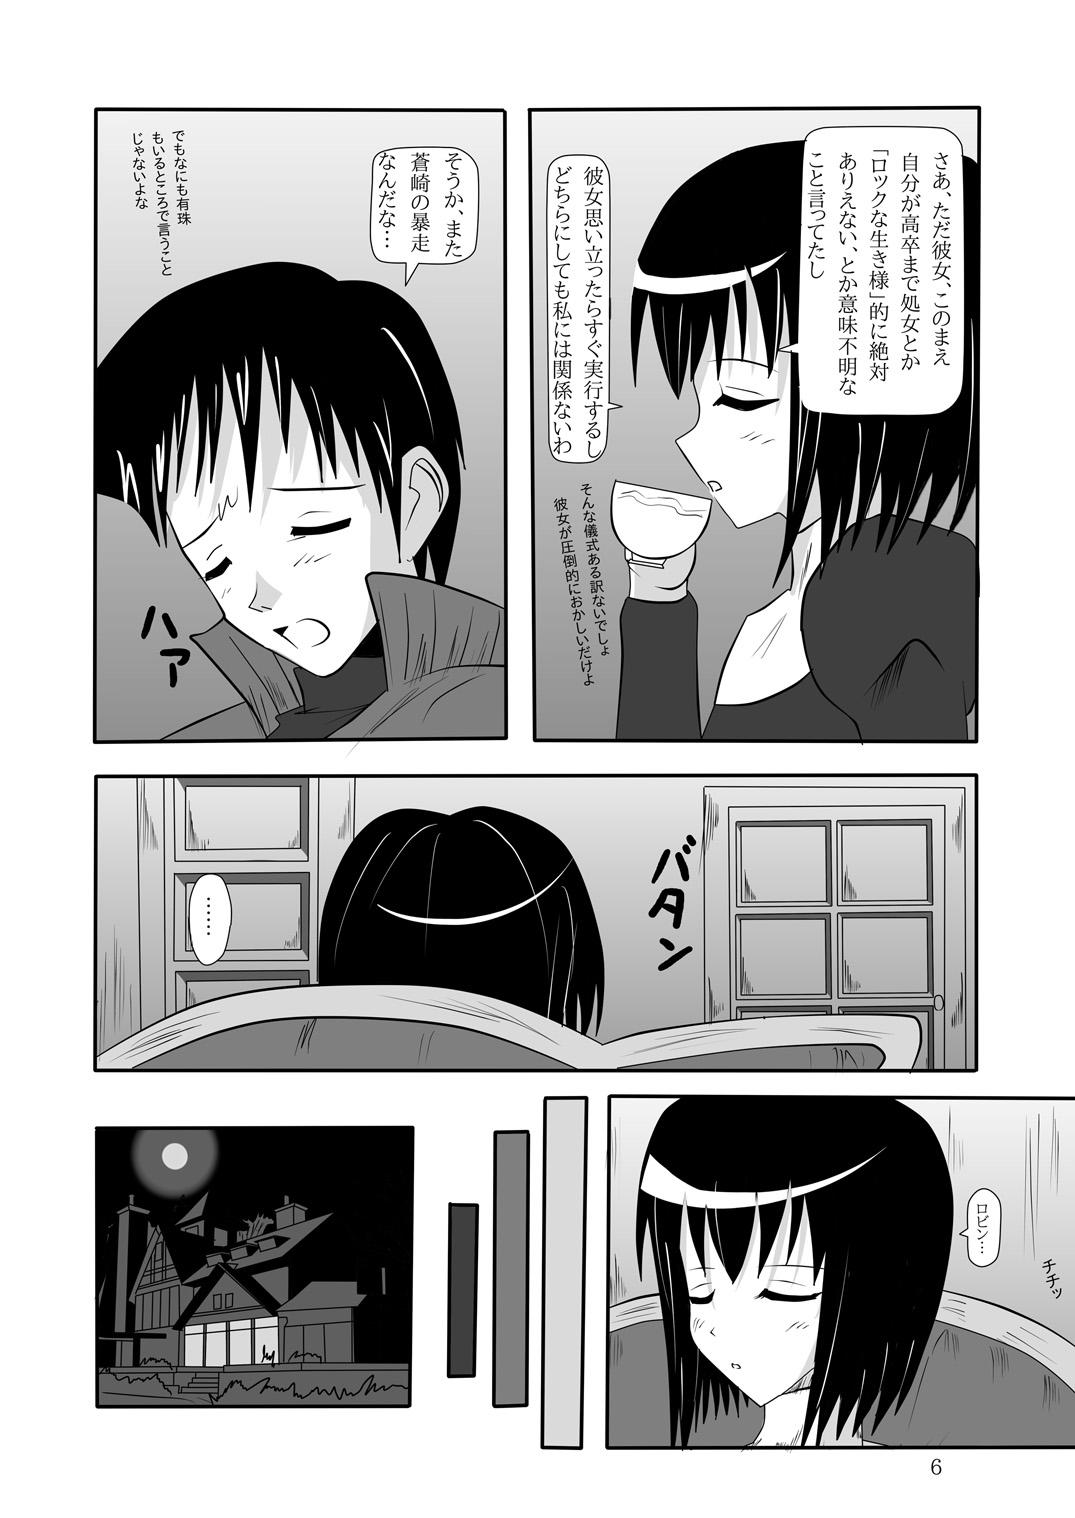 Roughsex smells like teen spirit - Mahou tsukai no yoru | witch on the holy night Sixtynine - Page 7